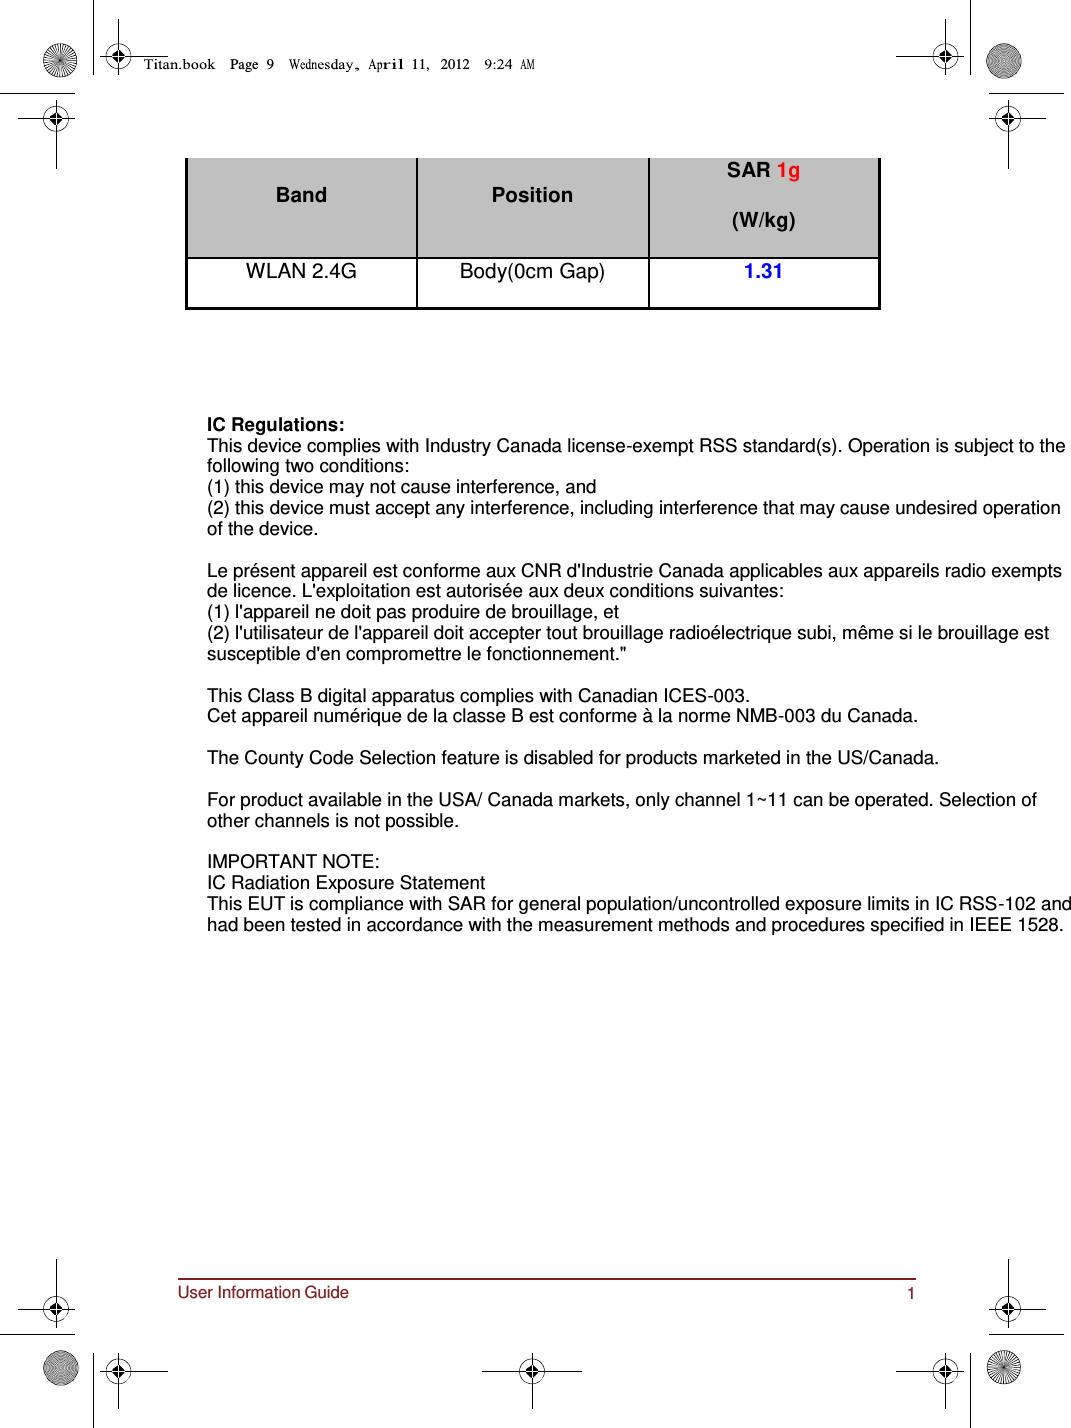 User Information Guide 11 Page  9         11,   2012        Band Position SAR 1g (W/kg) WLAN 2.4G Body(0cm Gap) 1.31      IC Regulations: This device complies with Industry Canada license-exempt RSS standard(s). Operation is subject to the following two conditions:  (1) this device may not cause interference, and  (2) this device must accept any interference, including interference that may cause undesired operation of the device.  Le présent appareil est conforme aux CNR d&apos;Industrie Canada applicables aux appareils radio exempts de licence. L&apos;exploitation est autorisée aux deux conditions suivantes:  (1) l&apos;appareil ne doit pas produire de brouillage, et  (2) l&apos;utilisateur de l&apos;appareil doit accepter tout brouillage radioélectrique subi, même si le brouillage est susceptible d&apos;en compromettre le fonctionnement.&quot;  This Class B digital apparatus complies with Canadian ICES-003. Cet appareil numérique de la classe B est conforme à la norme NMB-003 du Canada.  The County Code Selection feature is disabled for products marketed in the US/Canada.  For product available in the USA/ Canada markets, only channel 1~11 can be operated. Selection of other channels is not possible.  IMPORTANT NOTE: IC Radiation Exposure Statement This EUT is compliance with SAR for general population/uncontrolled exposure limits in IC RSS-102 and had been tested in accordance with the measurement methods and procedures specified in IEEE 1528.       